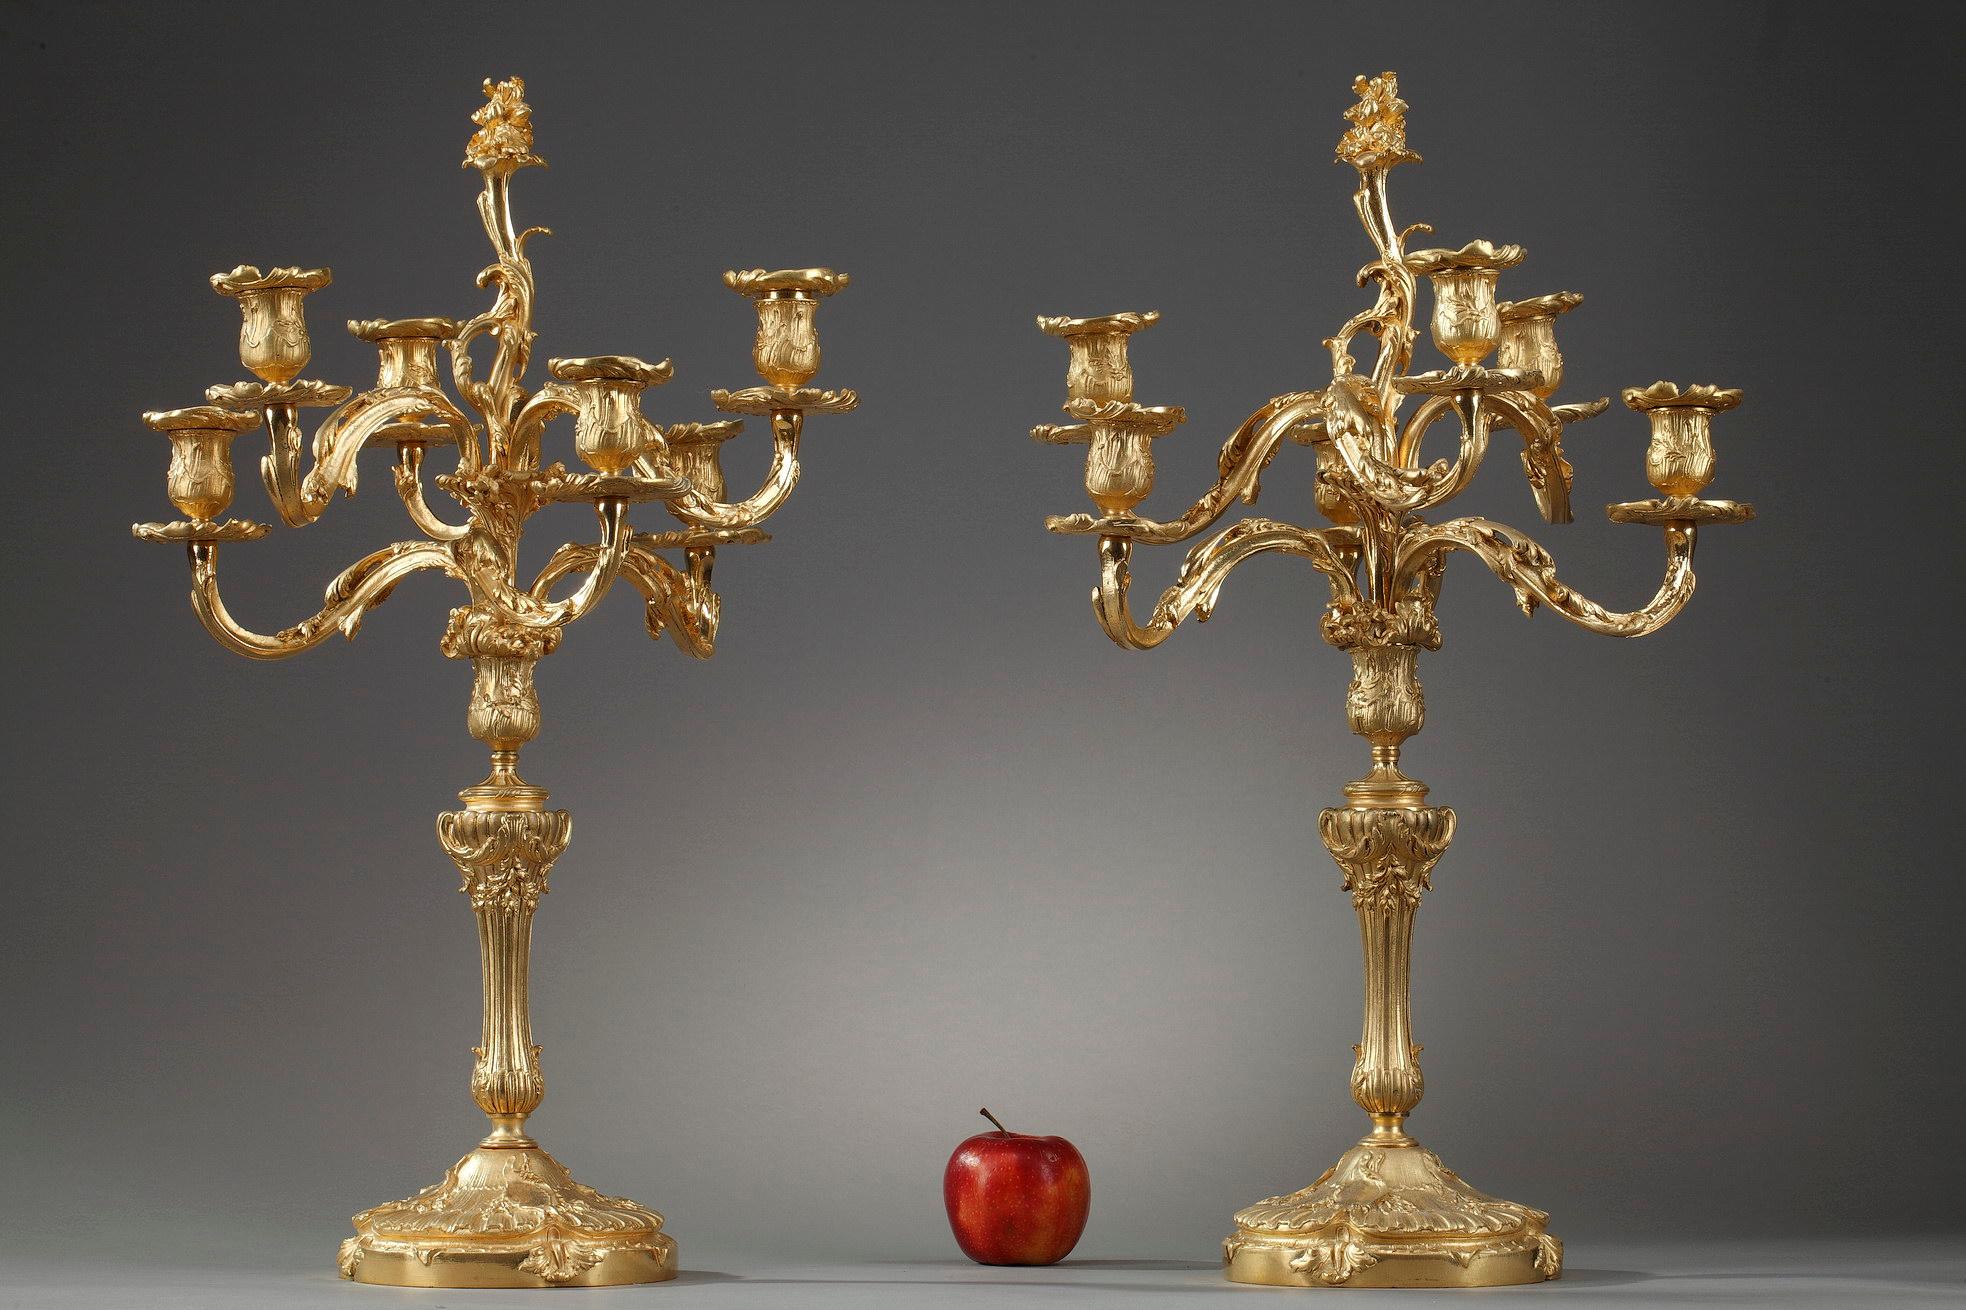 Pair of gilt bronze candelabras in the Louis XV style chased with foliage and flowers. The six twisted arms of light decorated with foliage give a feeling of movement typical of the rocaille style. The circular base supports a central fluted shaft